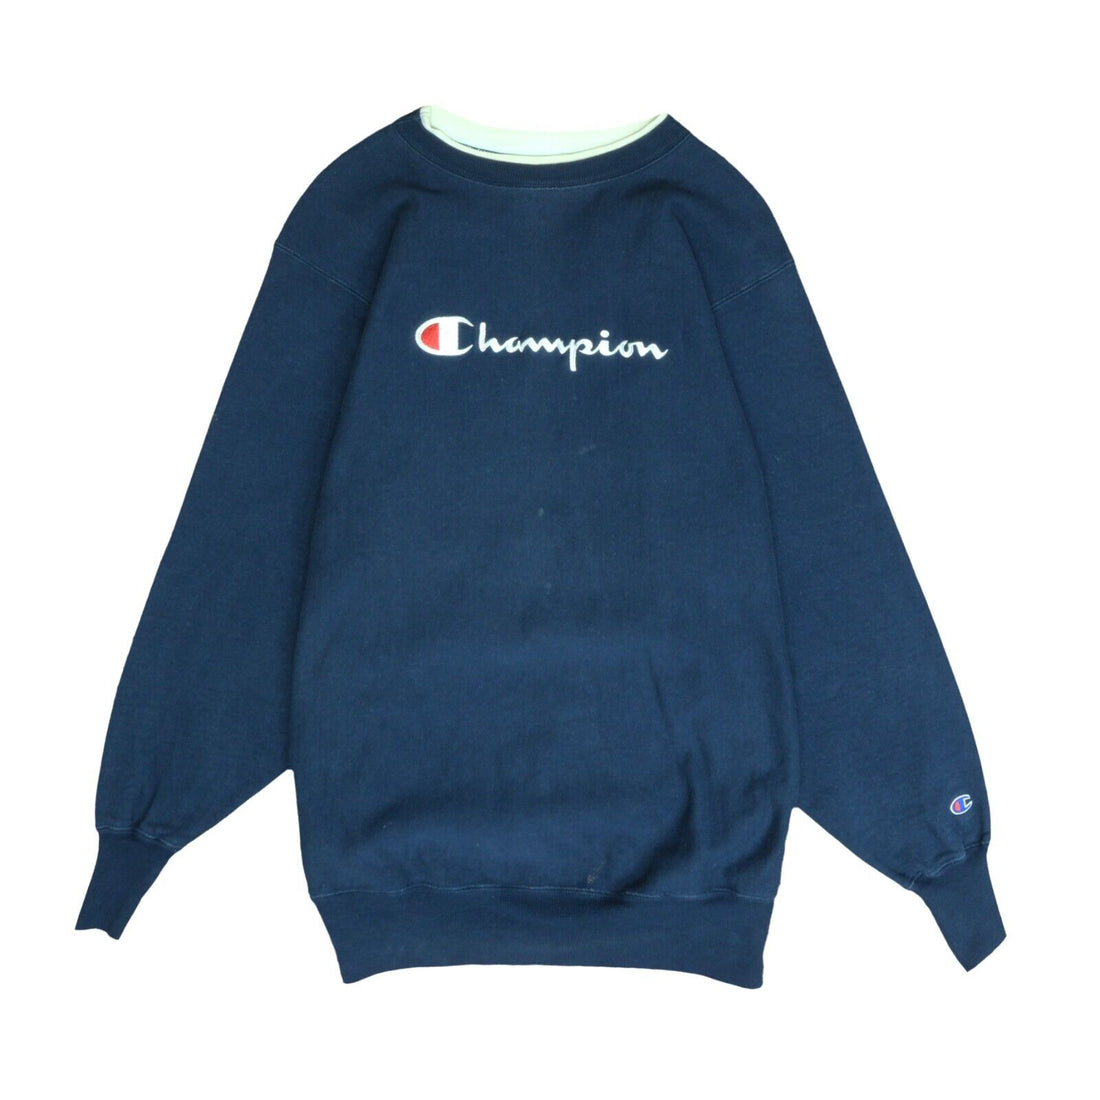 Vintage Champion Reverse Weave Sweatshirt Size 2XL Embroidered Spell Out 90s